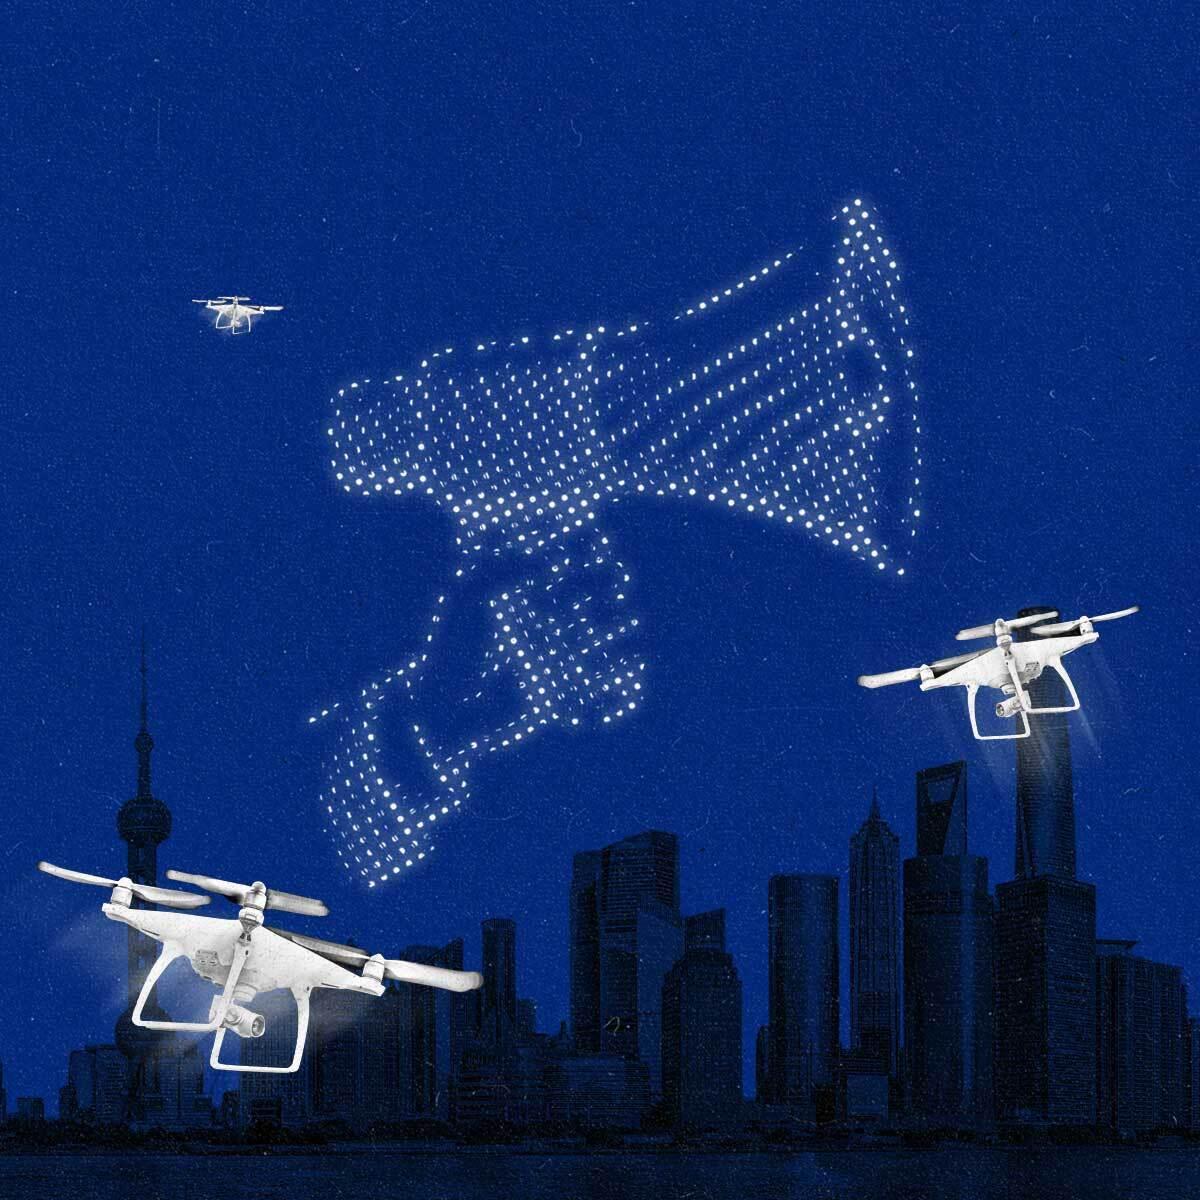 Illustration of drones flying over a city with a midnight sky and a hand holding a megaphone in the middle